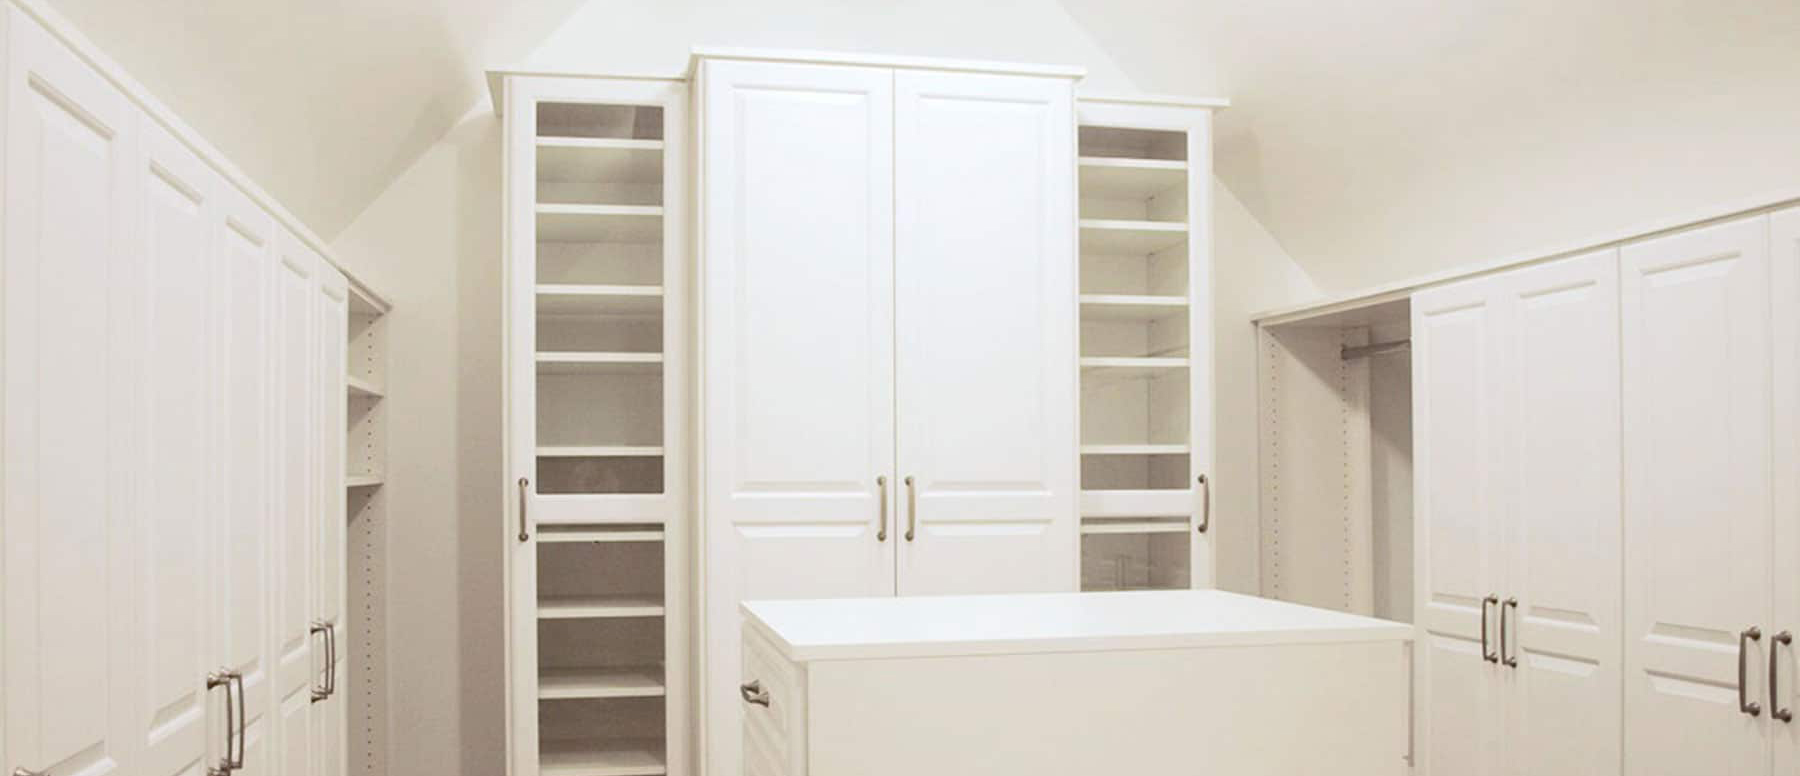 An elaborate white closet with multiple cabinets, drawers, and cubbies.